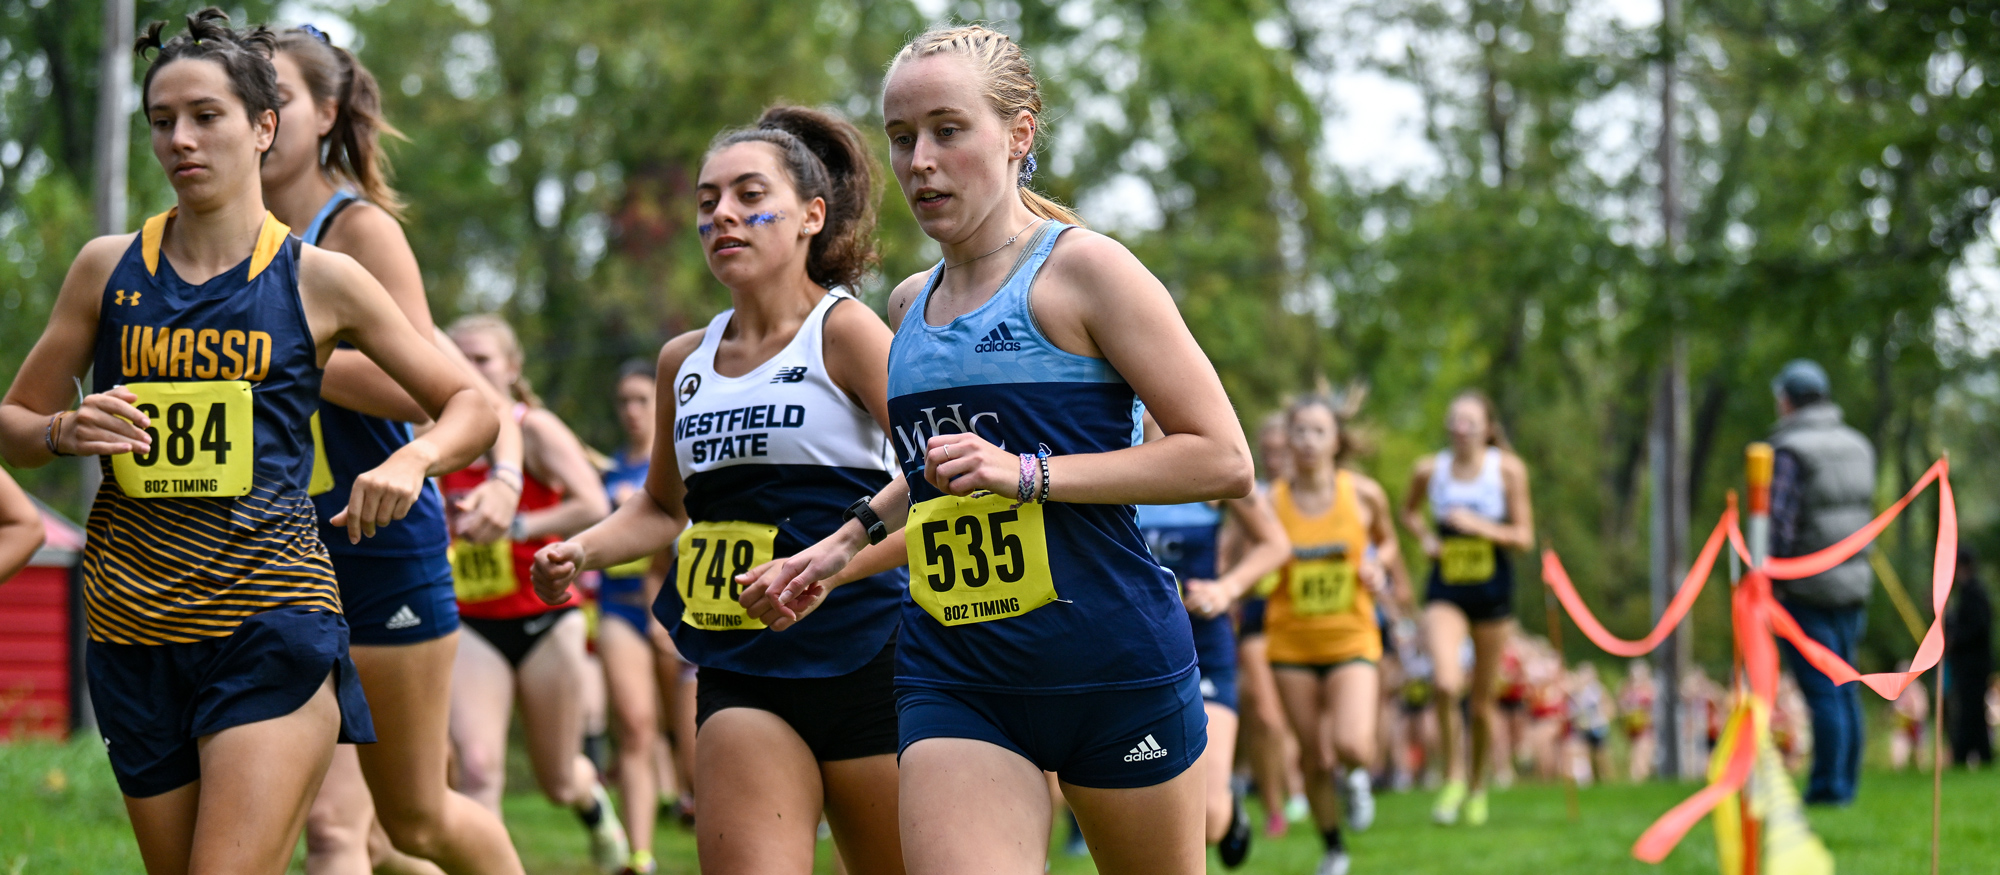 Senior captain Bridget Hall finished 123rd among 210 runners, second fastest for Mount Holyoke, at the highly competitive Connecticut College Invitational on Oct. 14, 2023. (RJB Sports file photo)